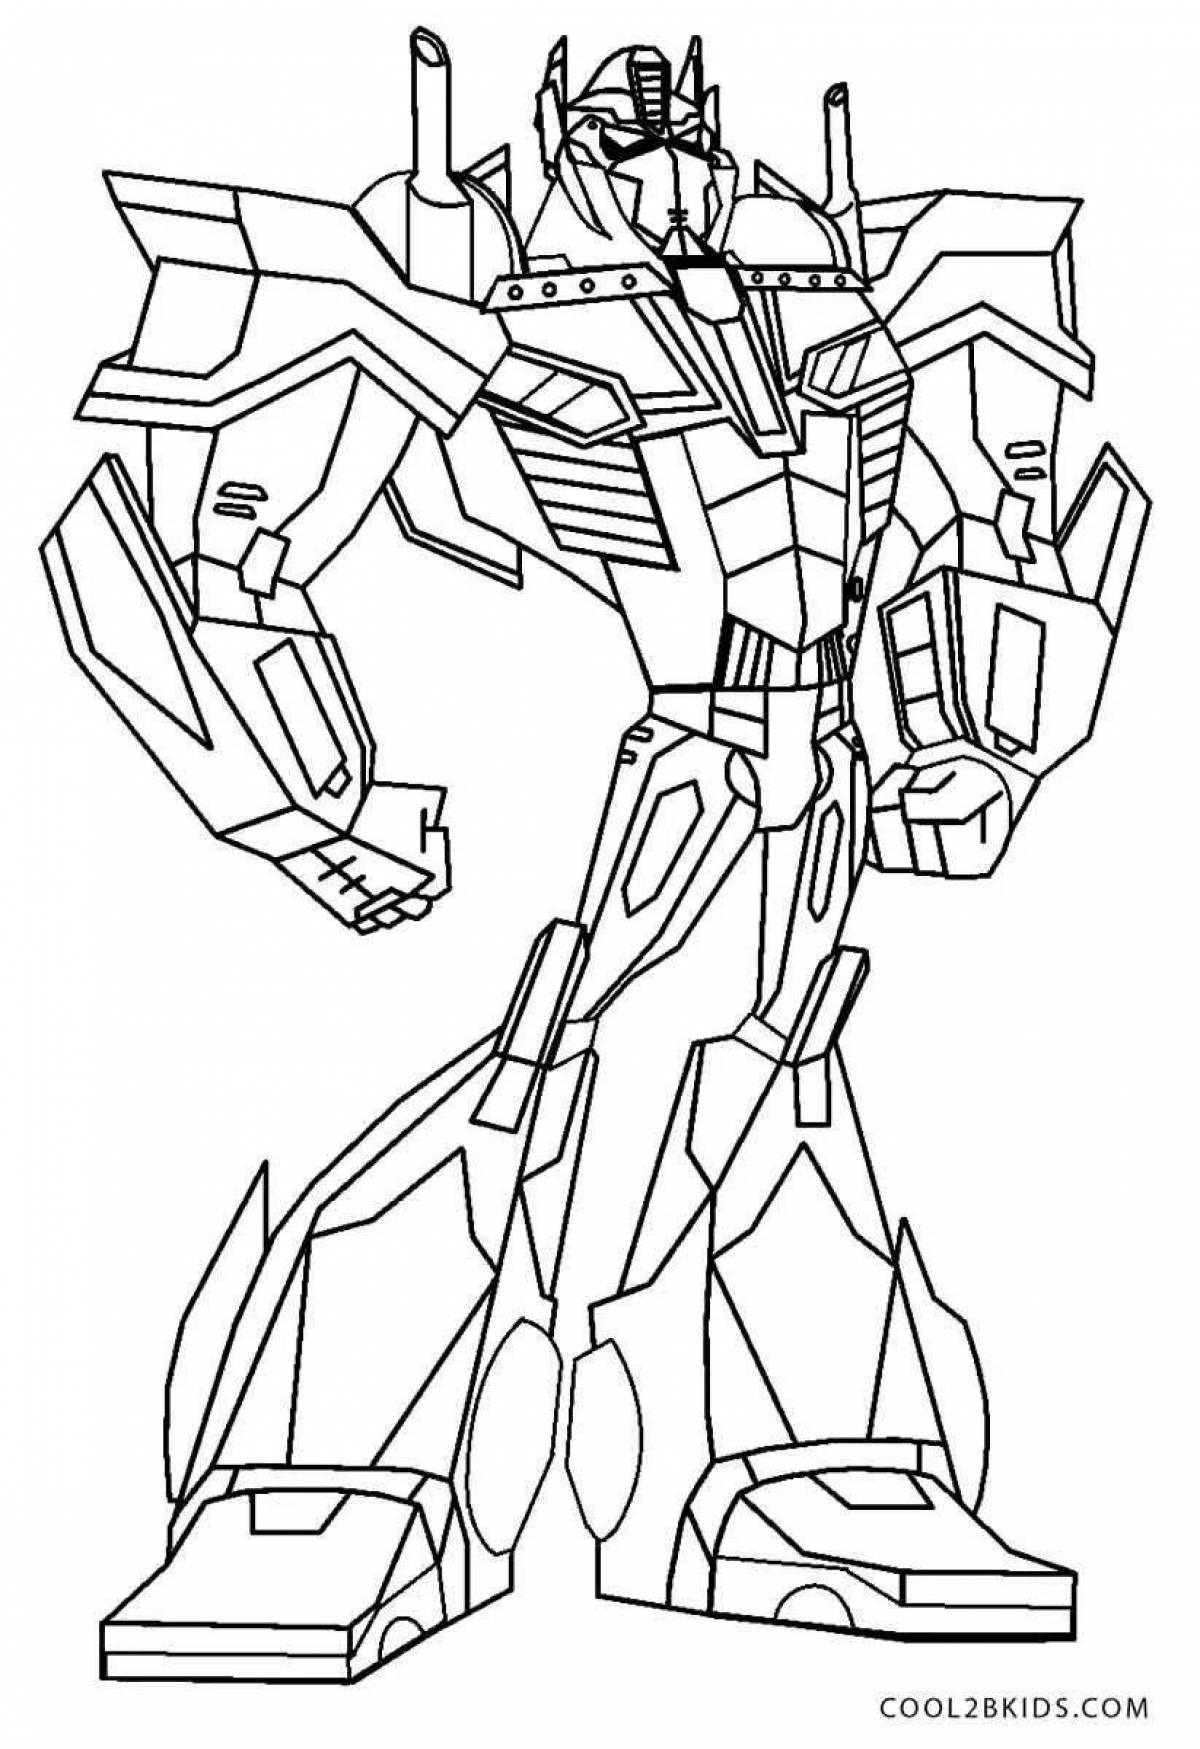 Colorful transformers coloring book for children 6-7 years old